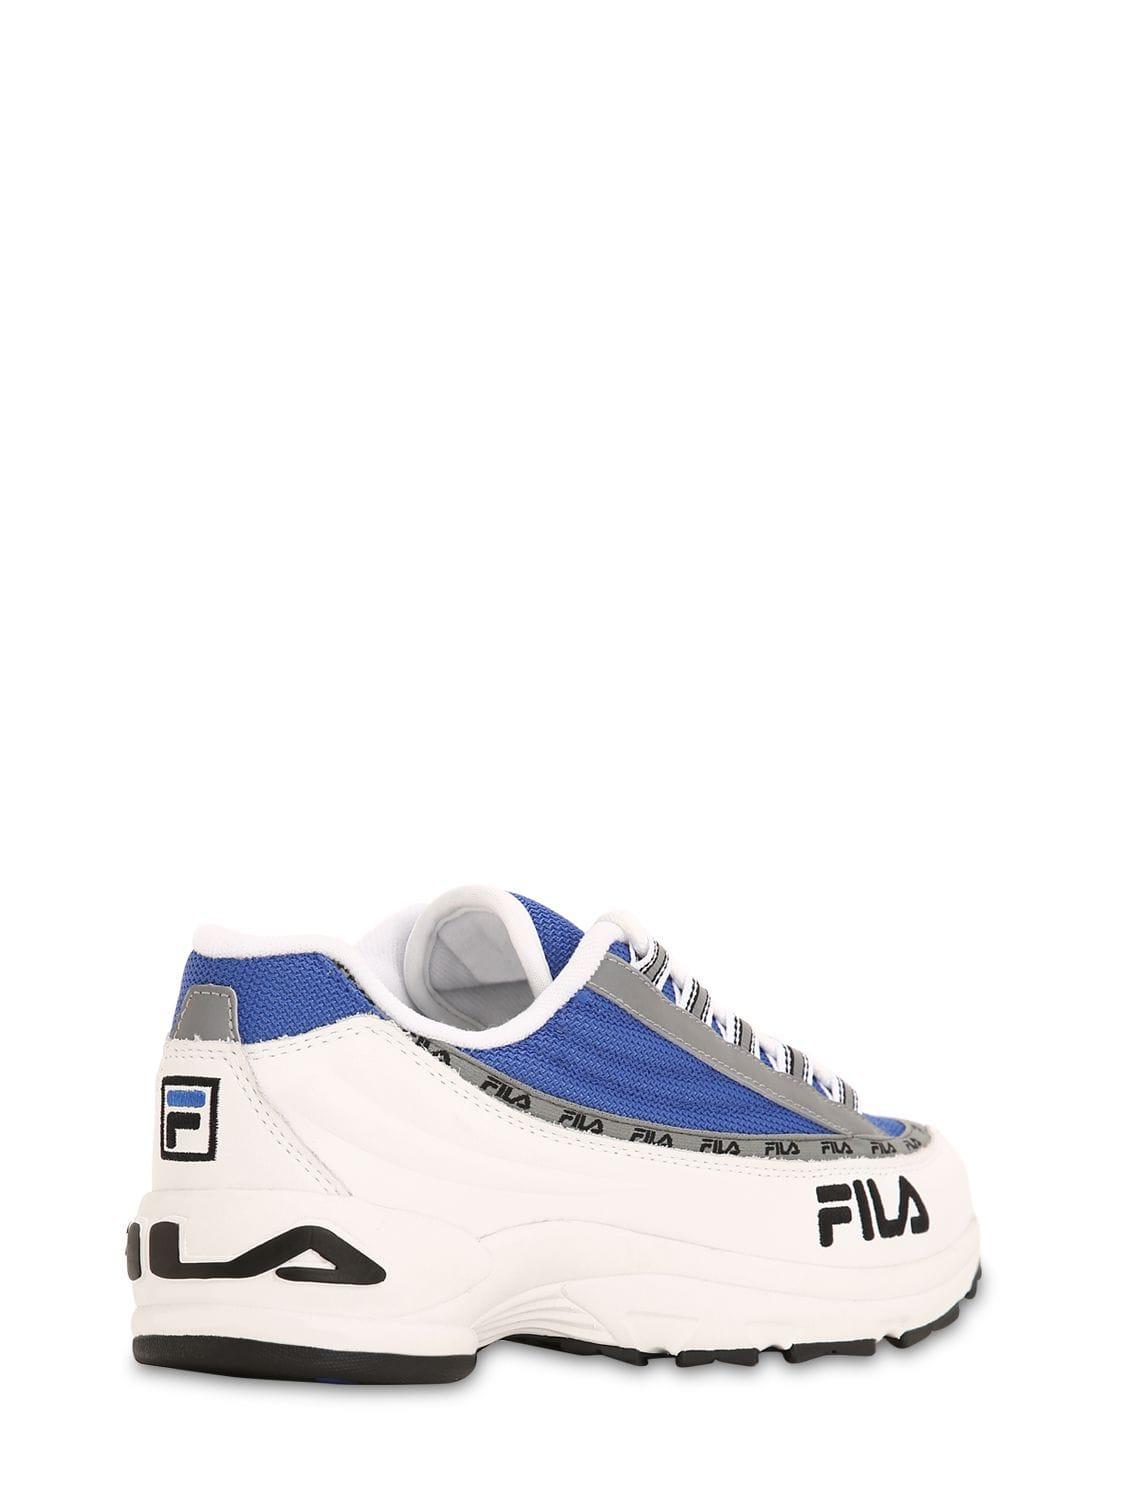 trend Hver uge Isolere Fila Leather Dragster Sneakers in Blue for Men - Lyst